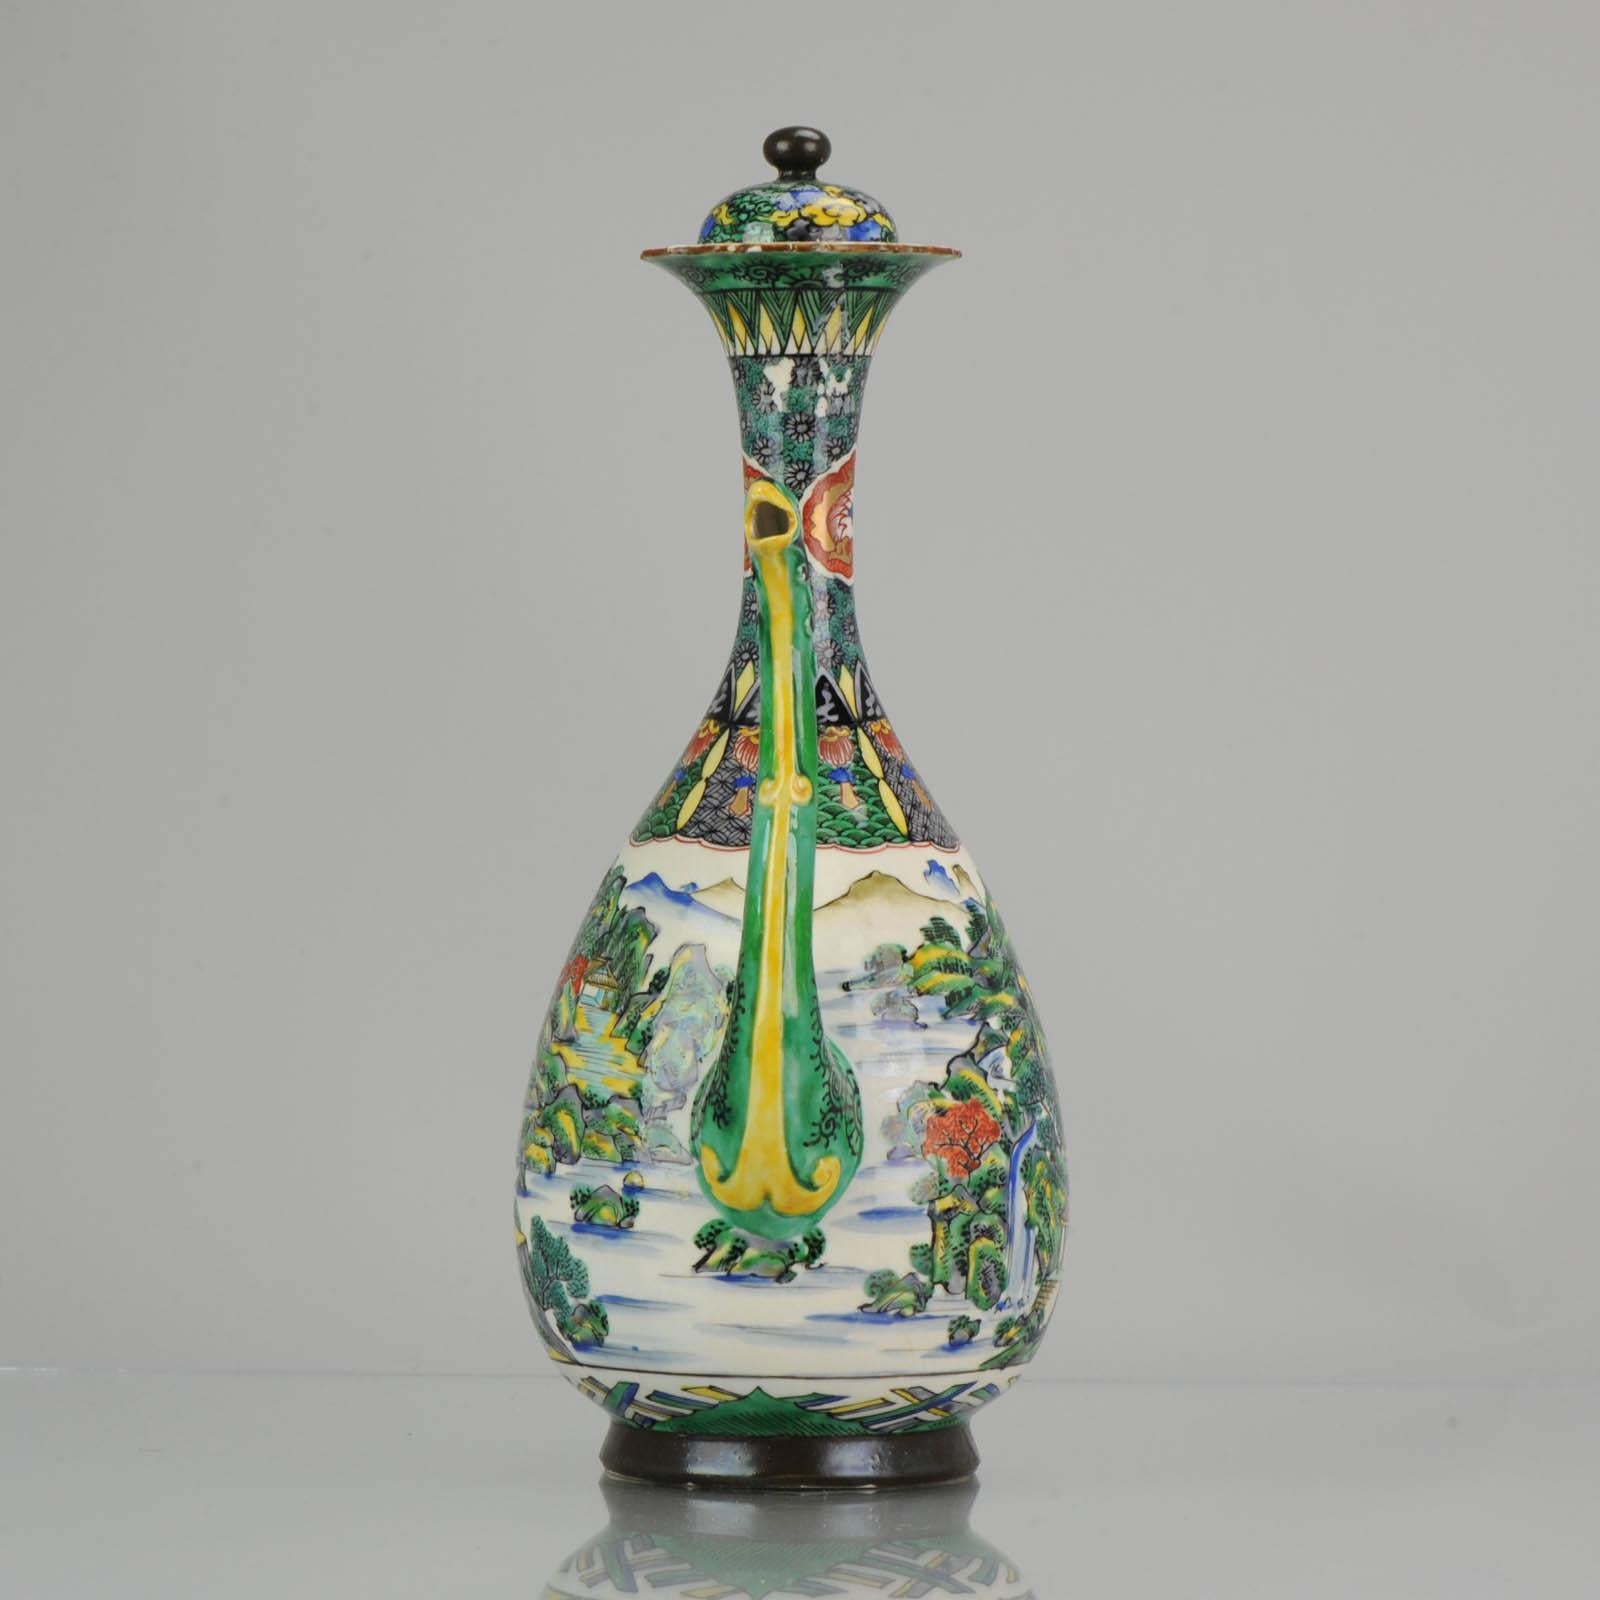 Lovely Japanese porcelain ewer in nice green enamels. Amazing piece with dragon handle and bird spout. Marked at the base.
Condition
Overall condition handle and spout are restored, some stick remainings to neck and lid. Size 320mm high and 205mm